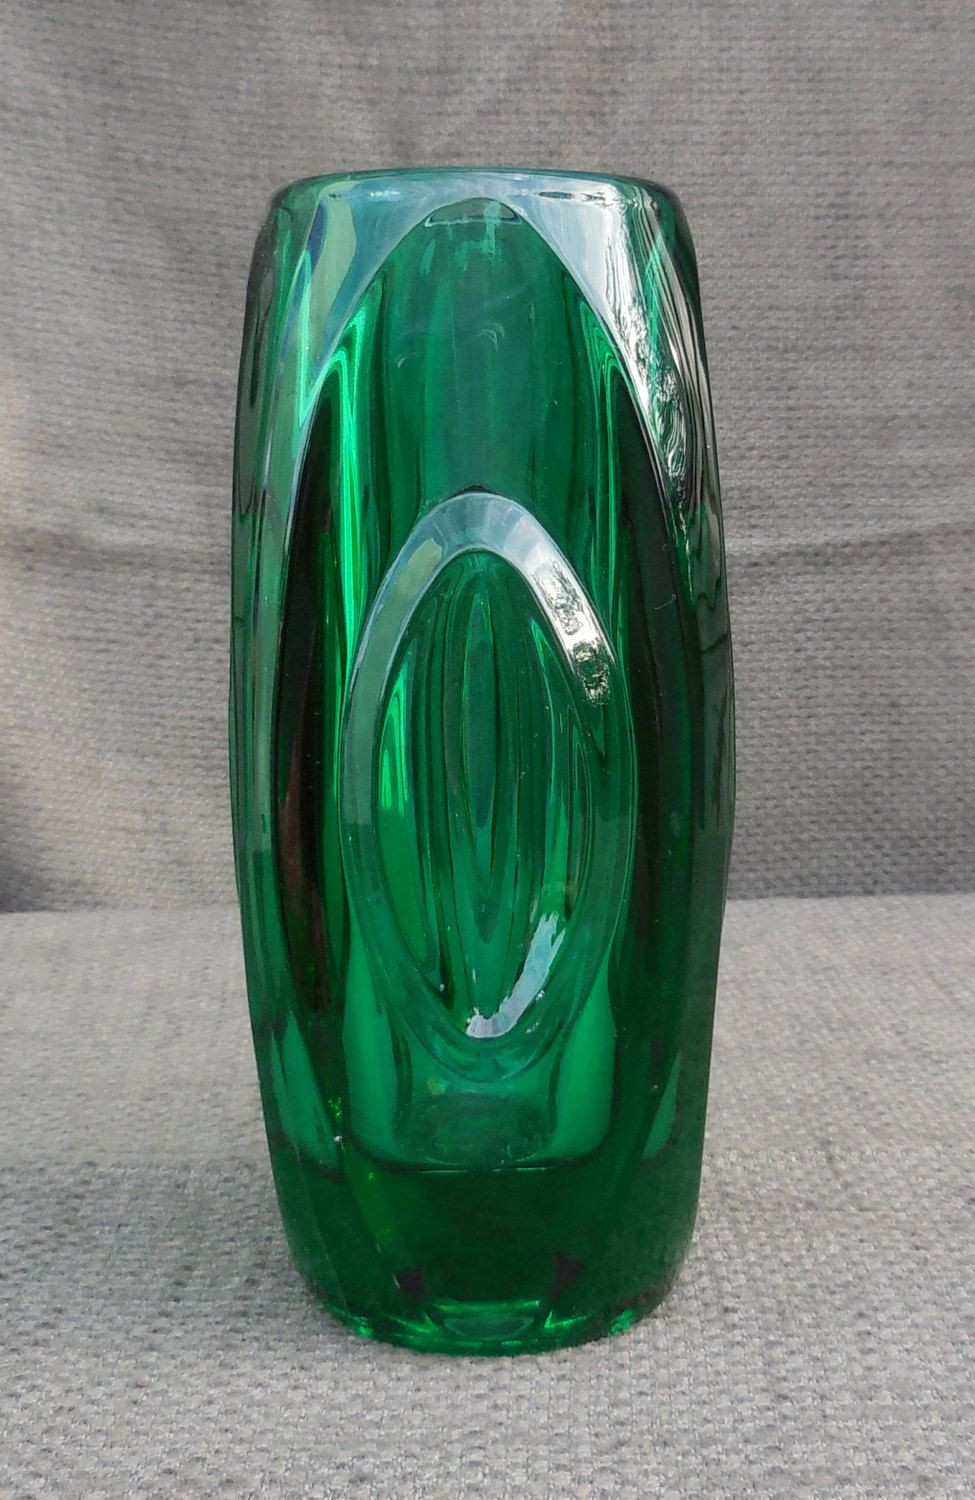 11 Stylish Dark Green Glass Vase 2024 free download dark green glass vase of stunning 1950s vintage rosice czech lens green art glass vase by for stunning 1950s vintage rosice czech lens green art glass vase by rudolph schrotter